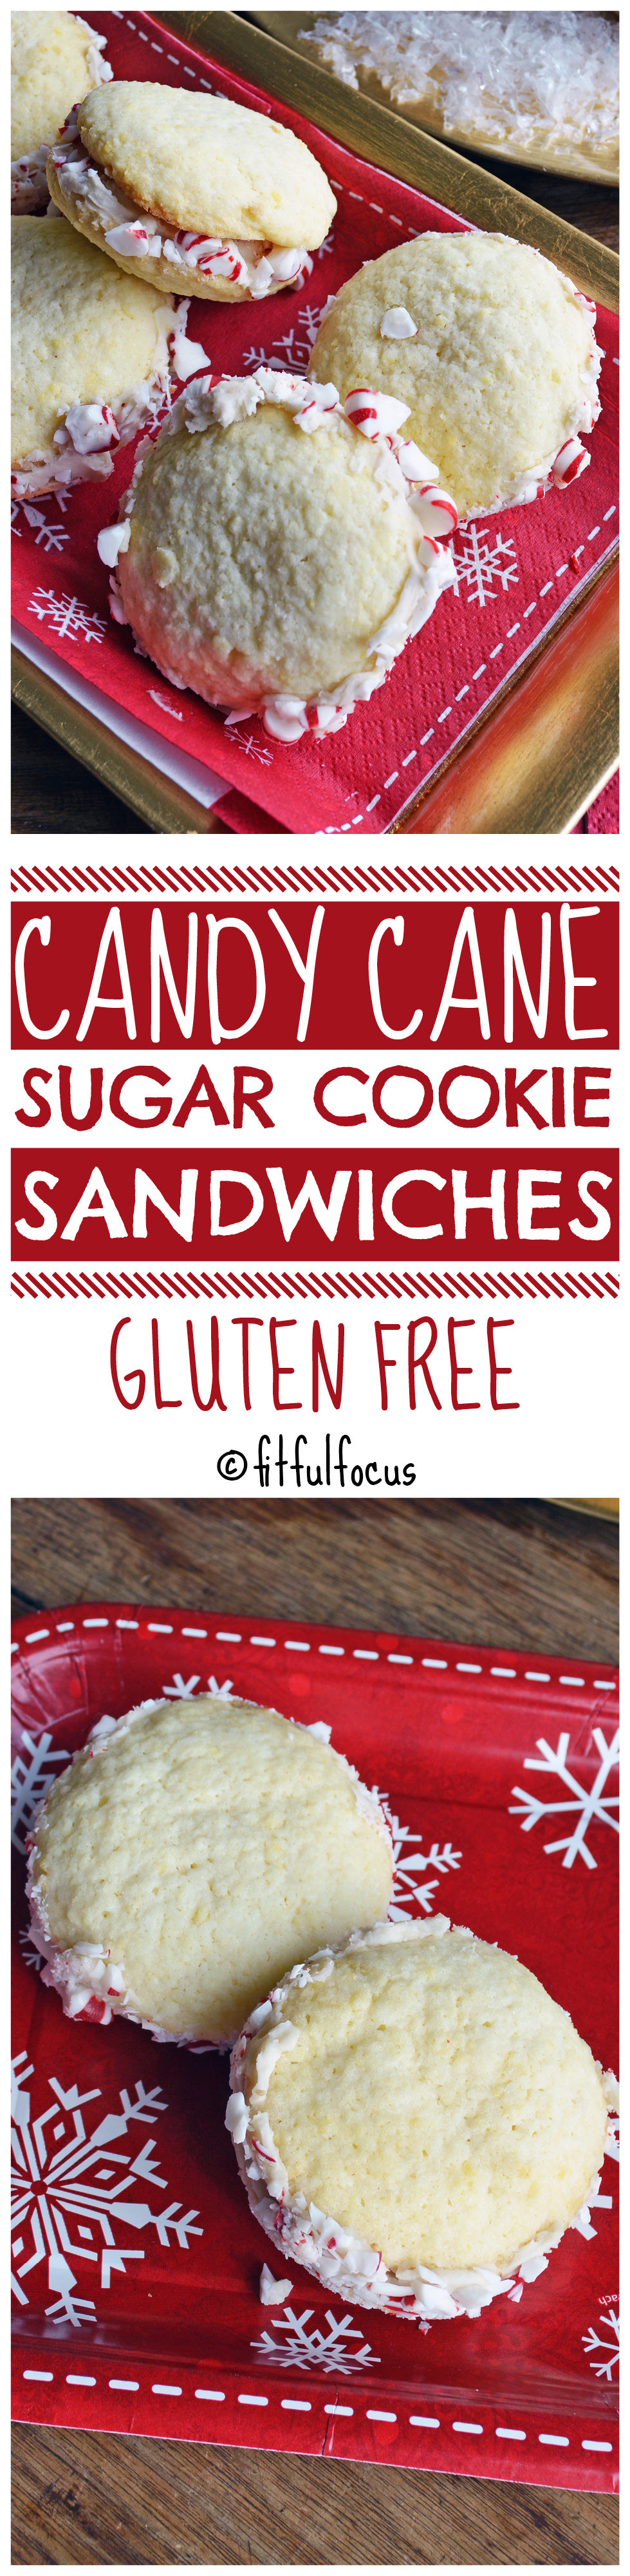 Gluten Free Christmas Candy
 Candy Cane Sugar Cookie Sandwiches gluten free Fitful